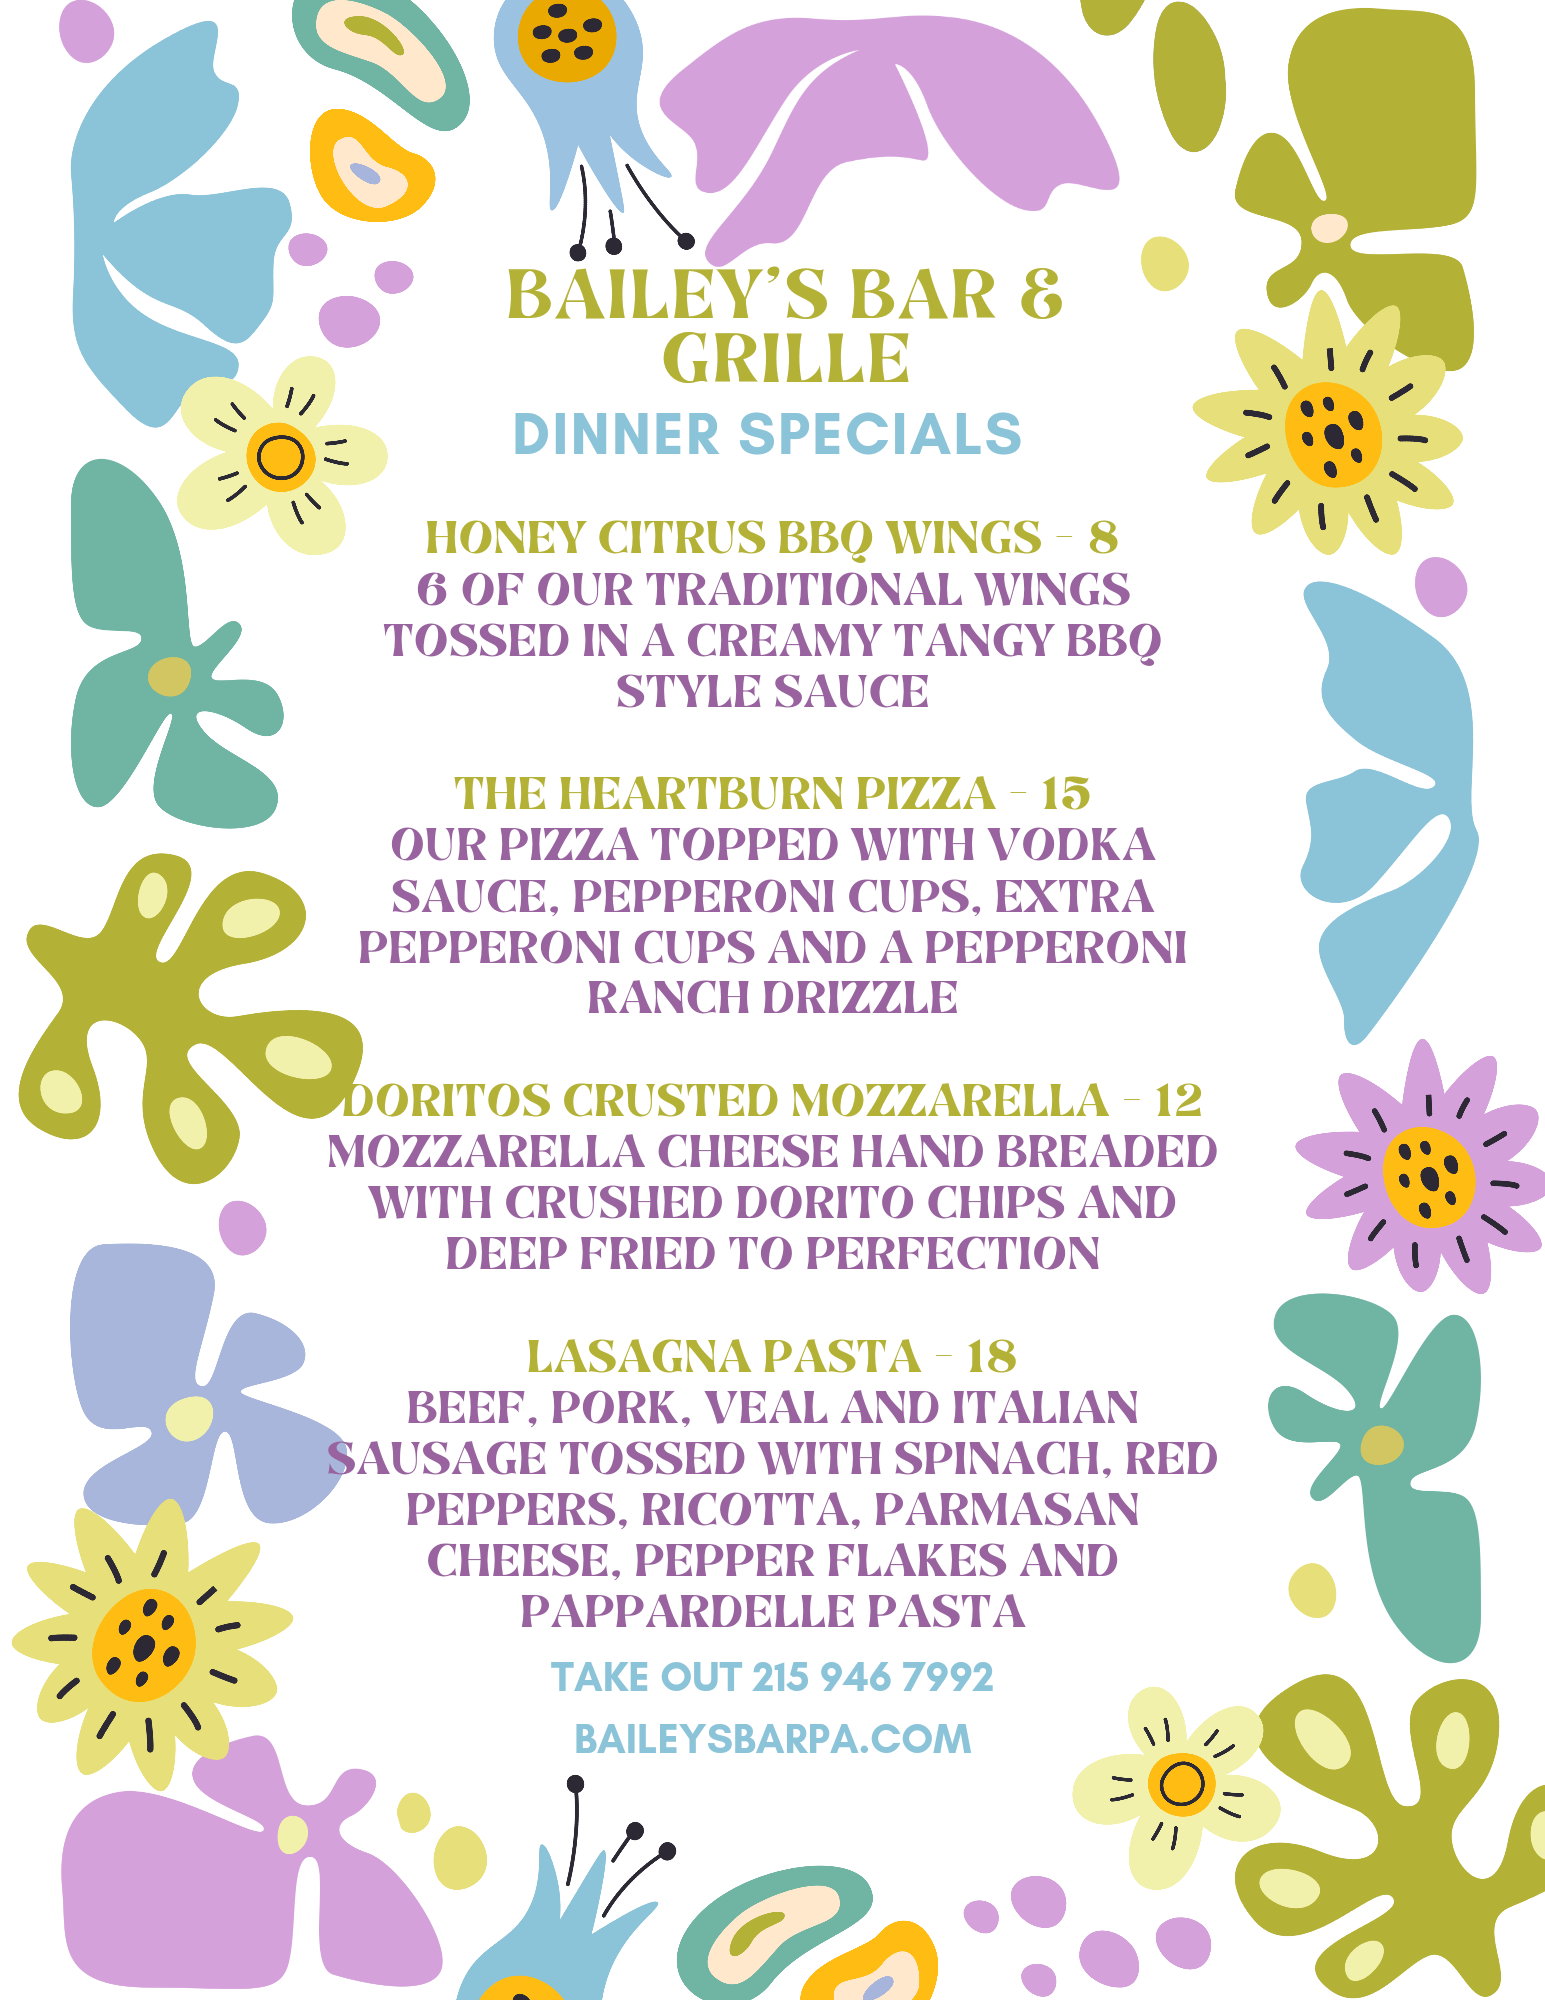 A flyer for bailey's bar and dinner specials.